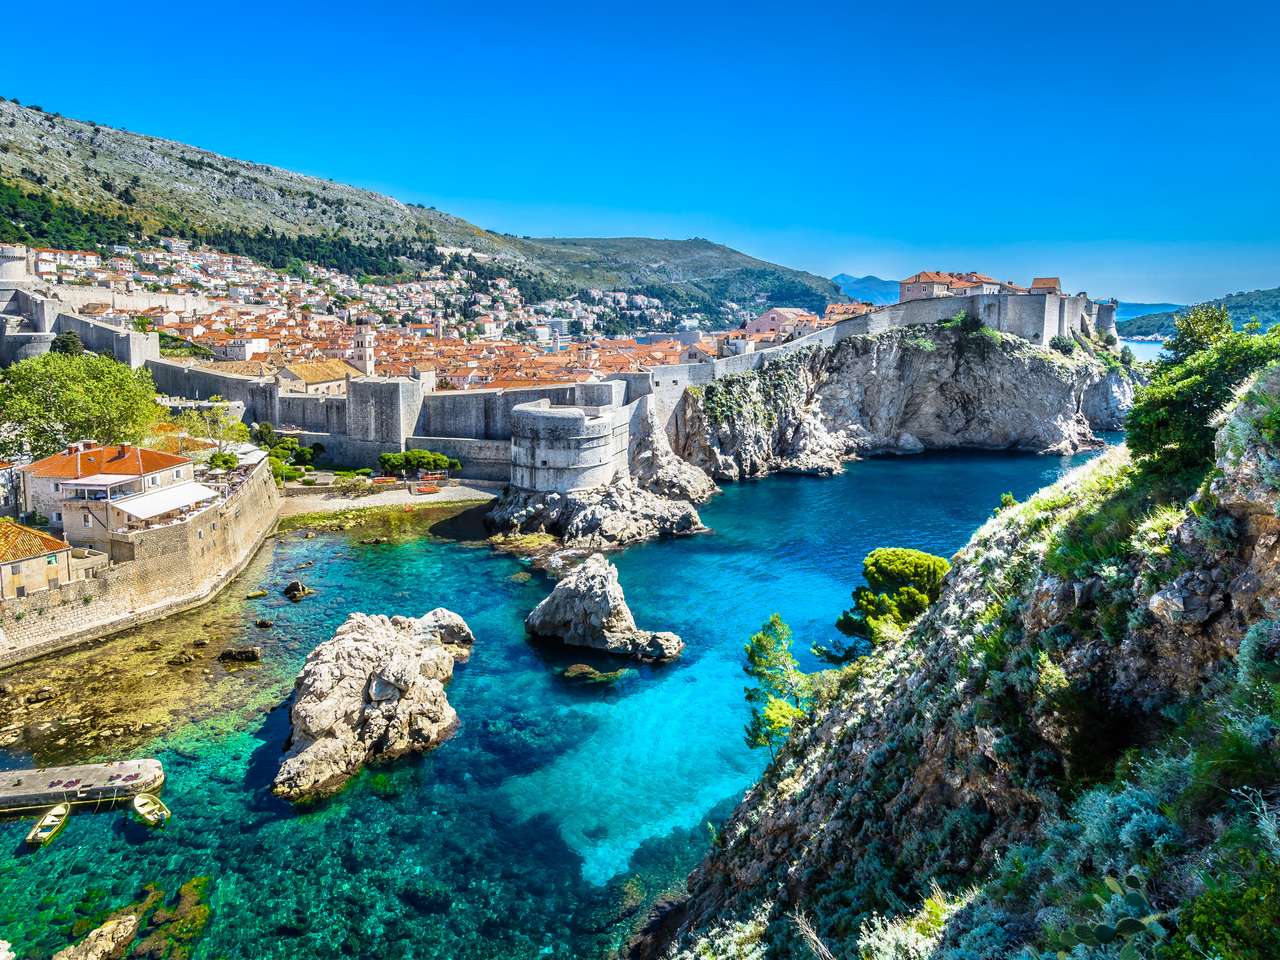 Old town Dubrovnik in Croatia puzzle online from photo